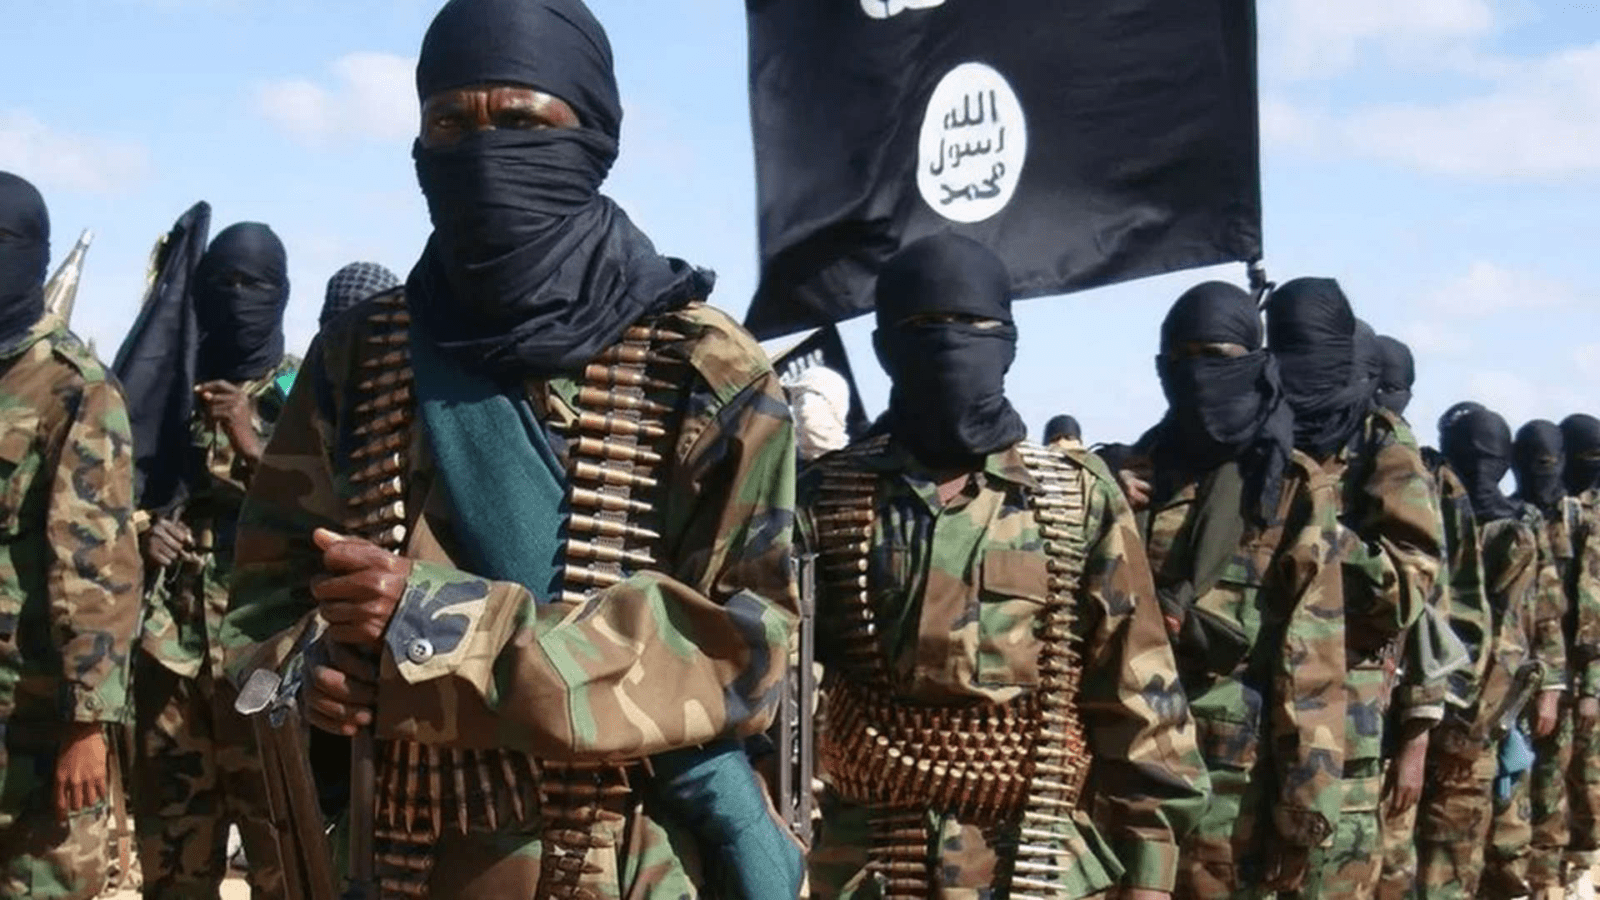 Al-Shabab militants have been active in Somalia for more than 15 years© AFP